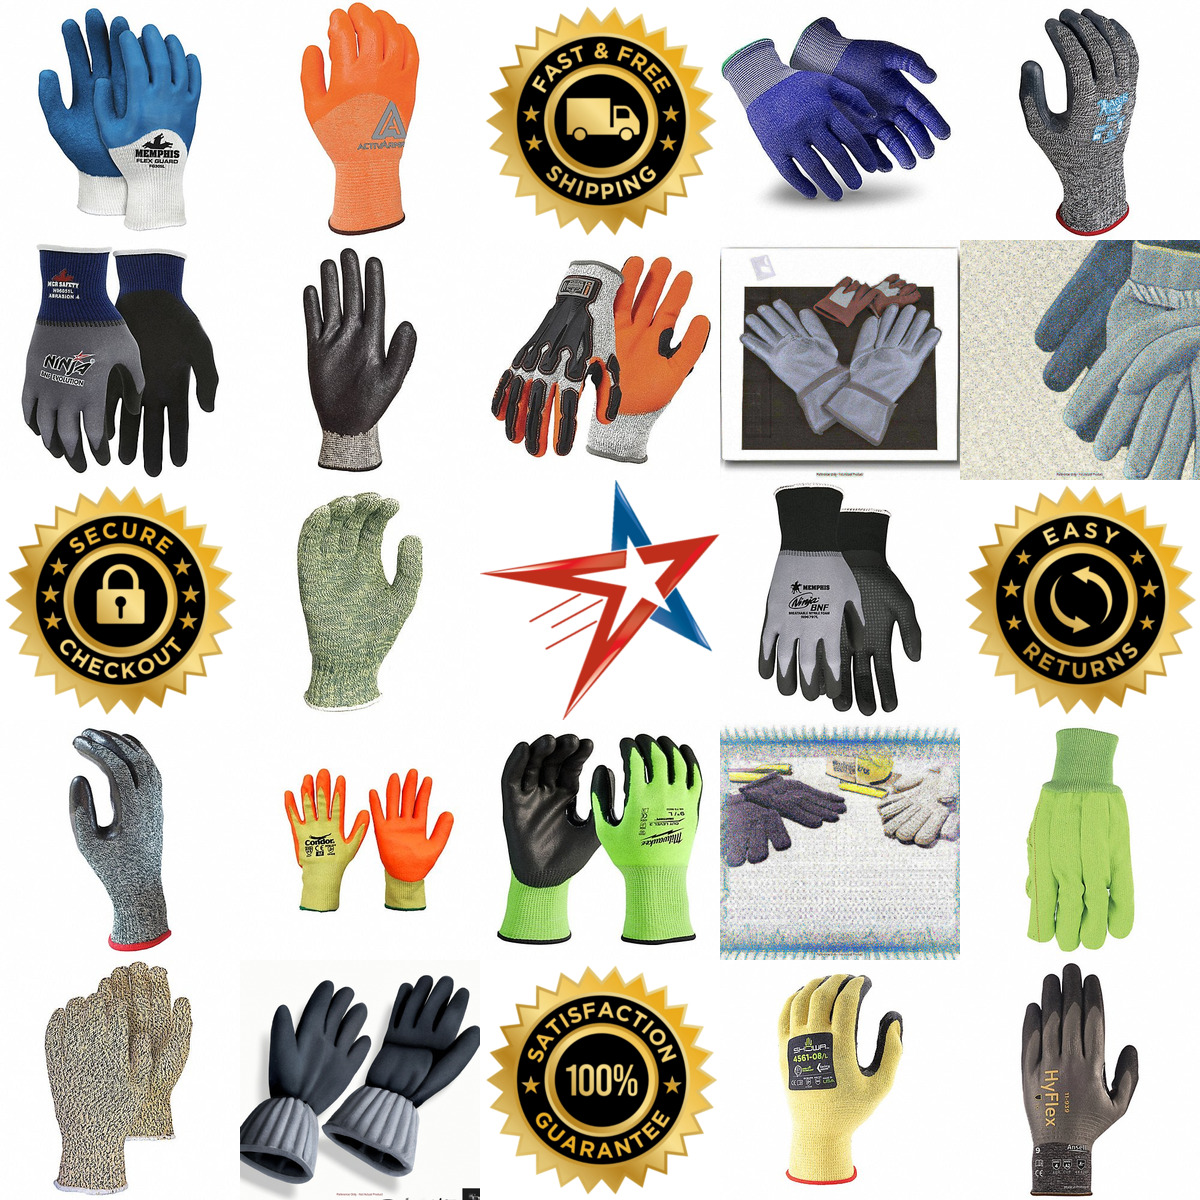 A selection of Knit Gloves and Mitts products on GoVets